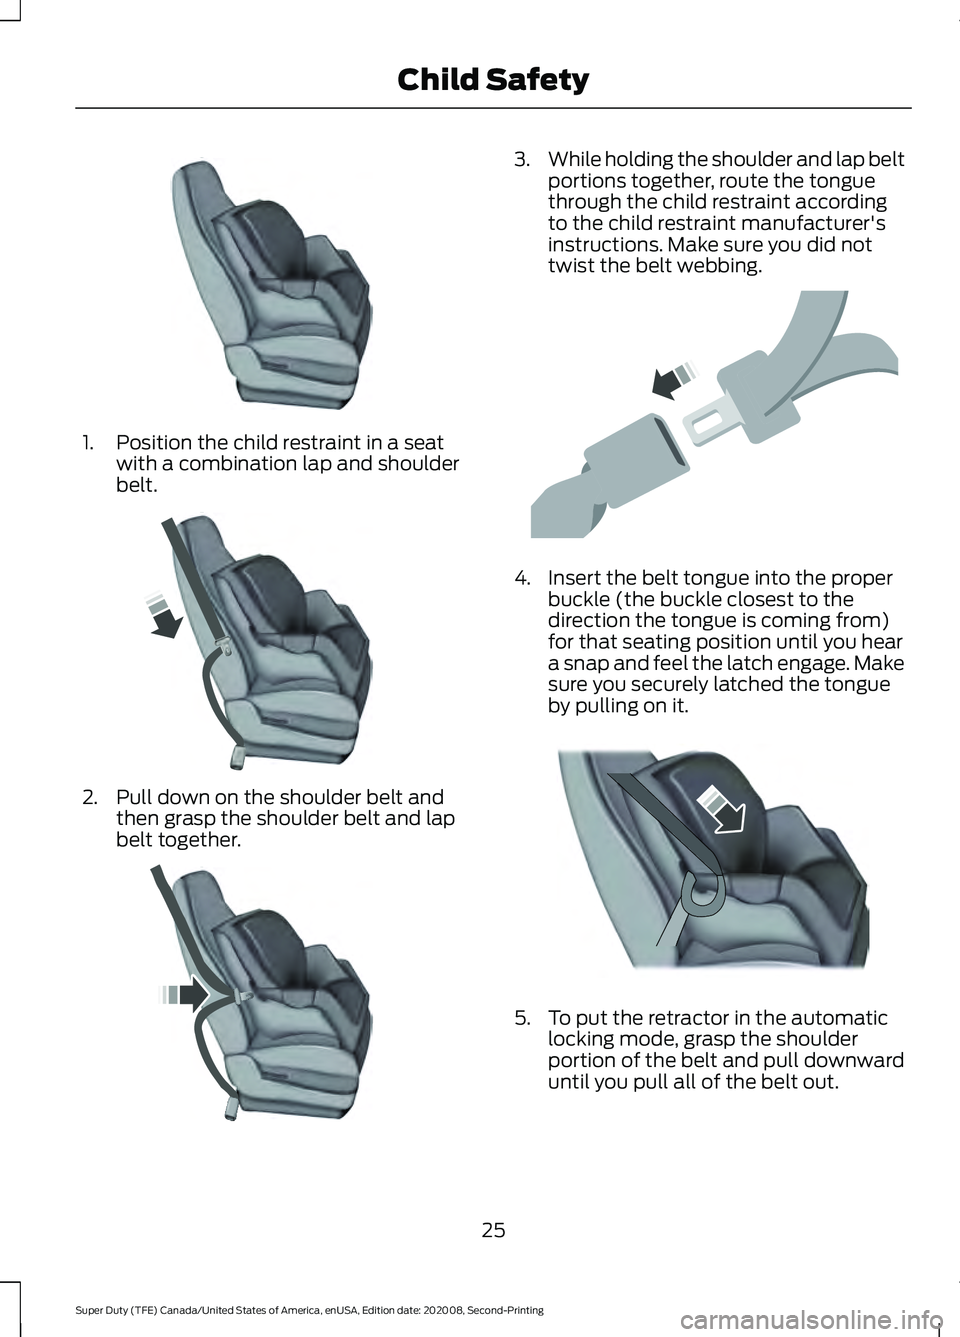 FORD SUPER DUTY 2021  Owners Manual 1. Position the child restraint in a seat
with a combination lap and shoulder
belt. 2. Pull down on the shoulder belt and
then grasp the shoulder belt and lap
belt together. 3.
While holding the shoul